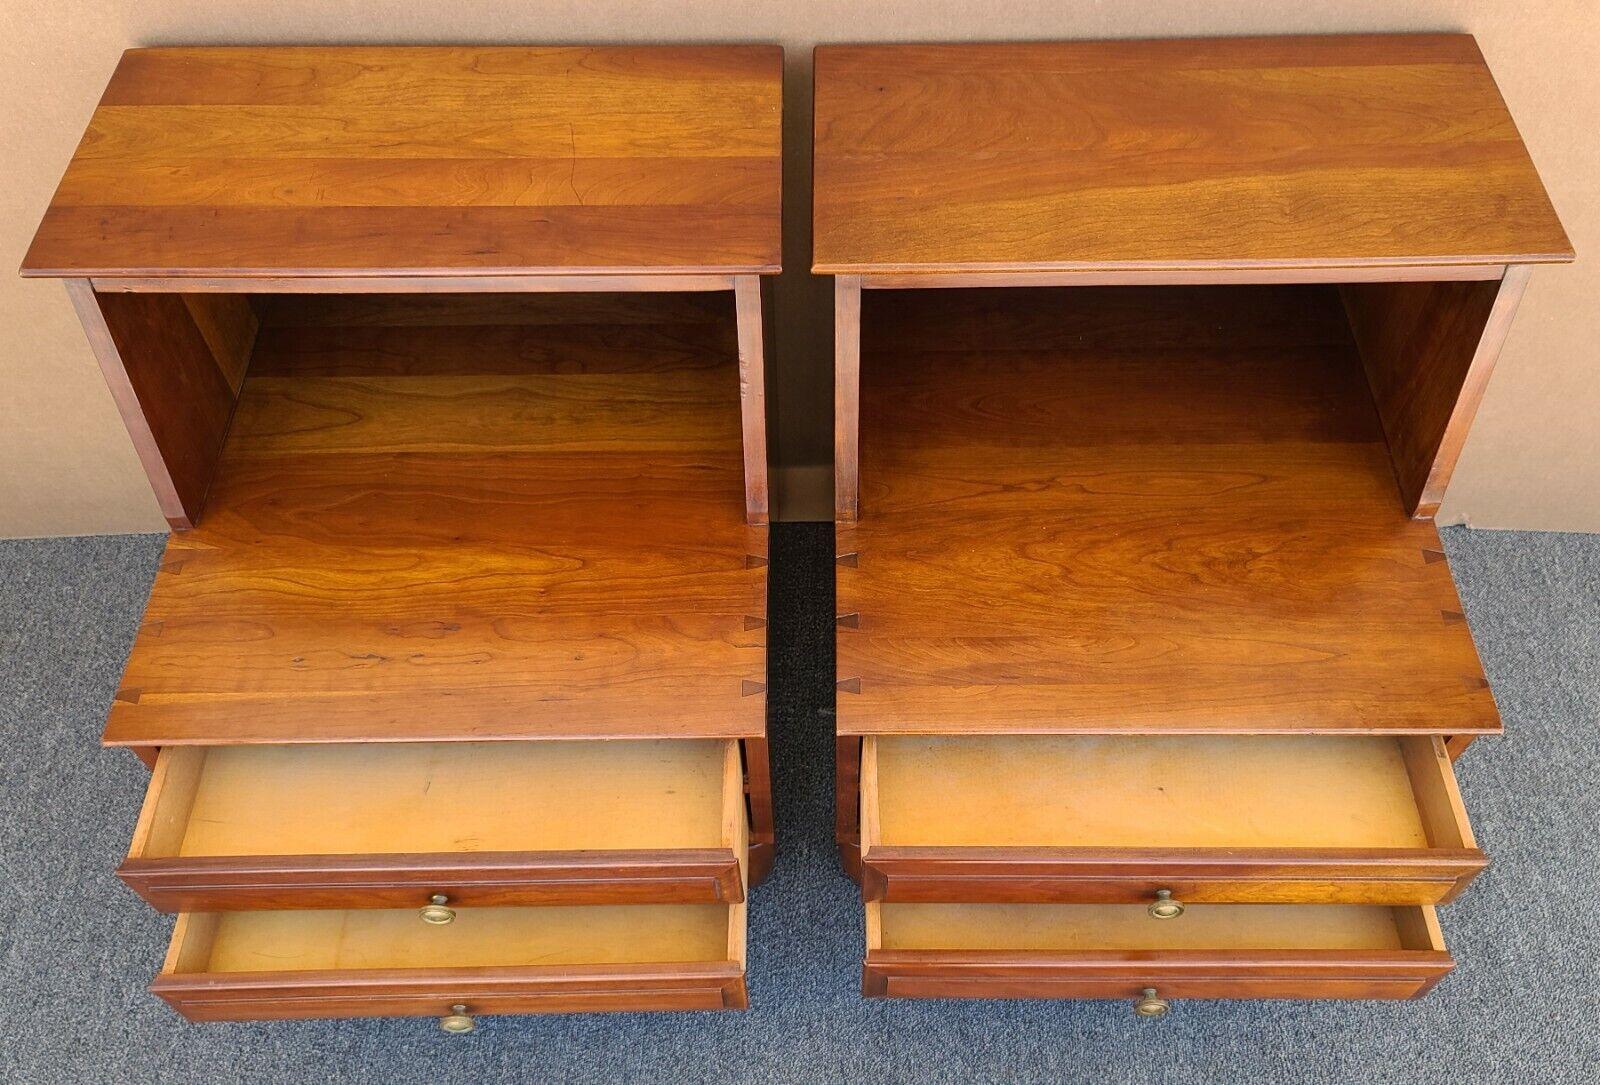 For FULL item description be sure to click on CONTINUE READING at the bottom of this listing.

Willett Mid-Century Danish Modern Solid Cherry 2 Tier 2 Drawer Nightstands 

Approximate Measurements in Inches
25.5